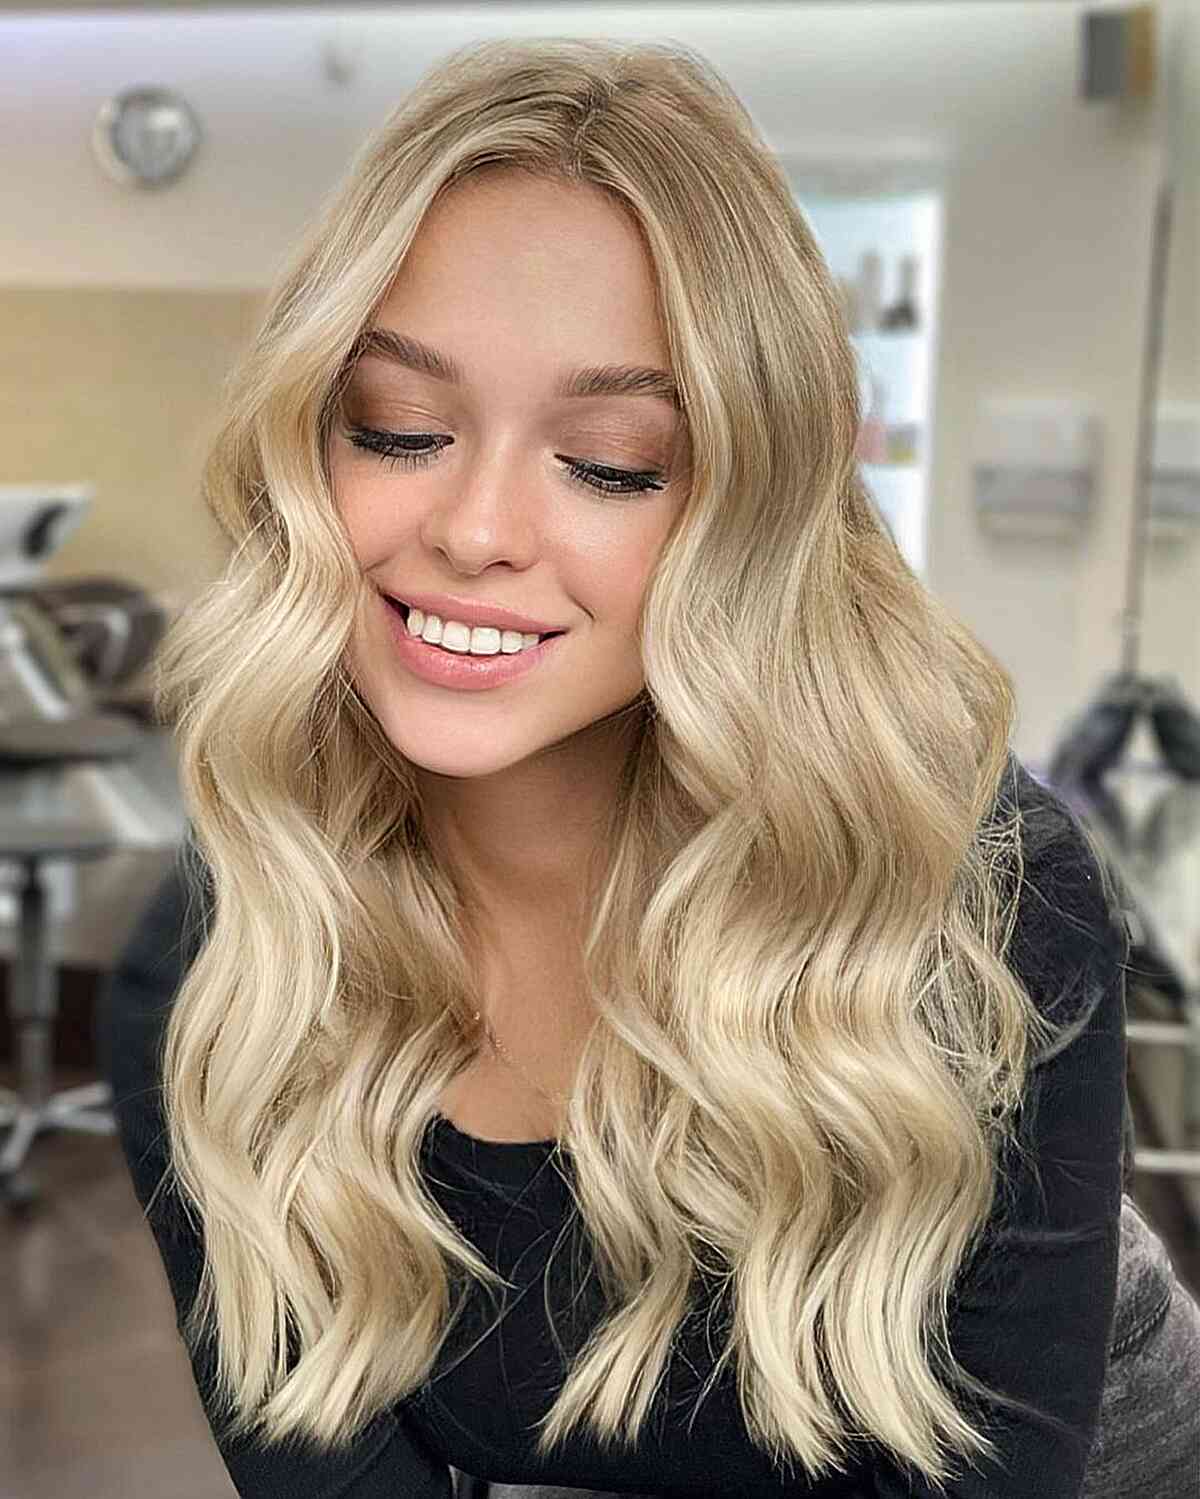 Long-Length Dusted Bright Blonde Hair with Brush Out Waves